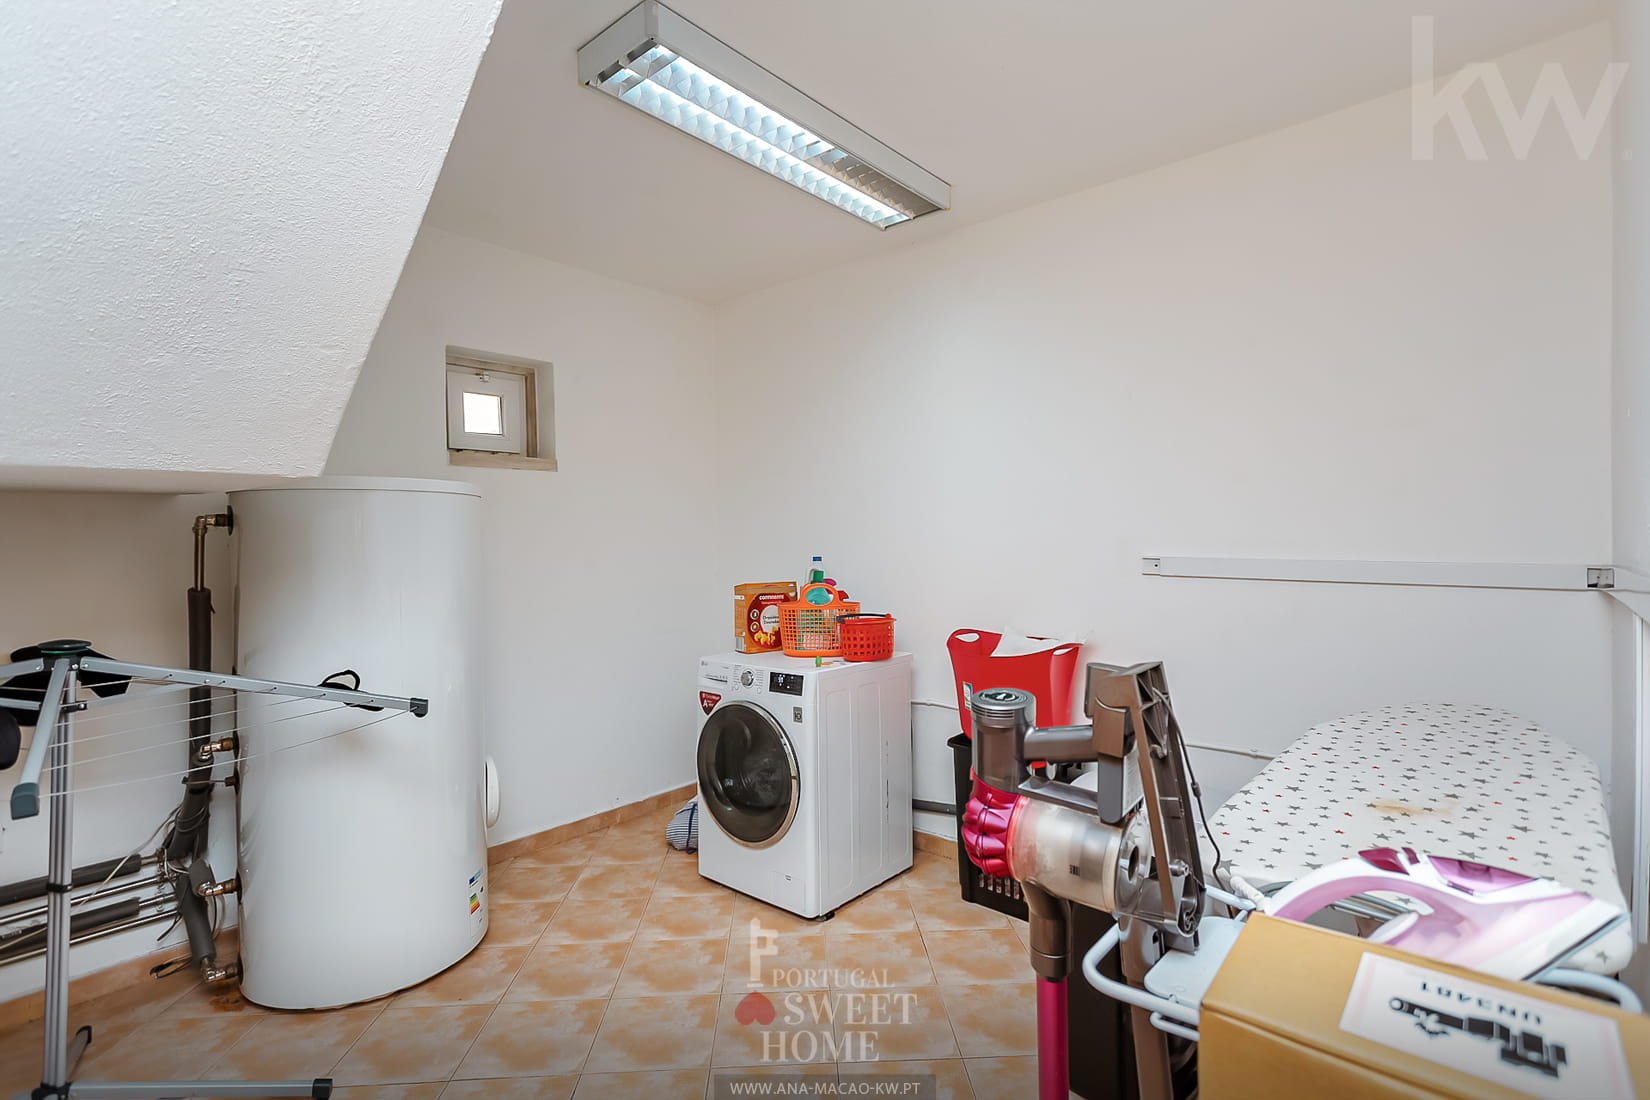 Technical area (10 m2) in the laundry room